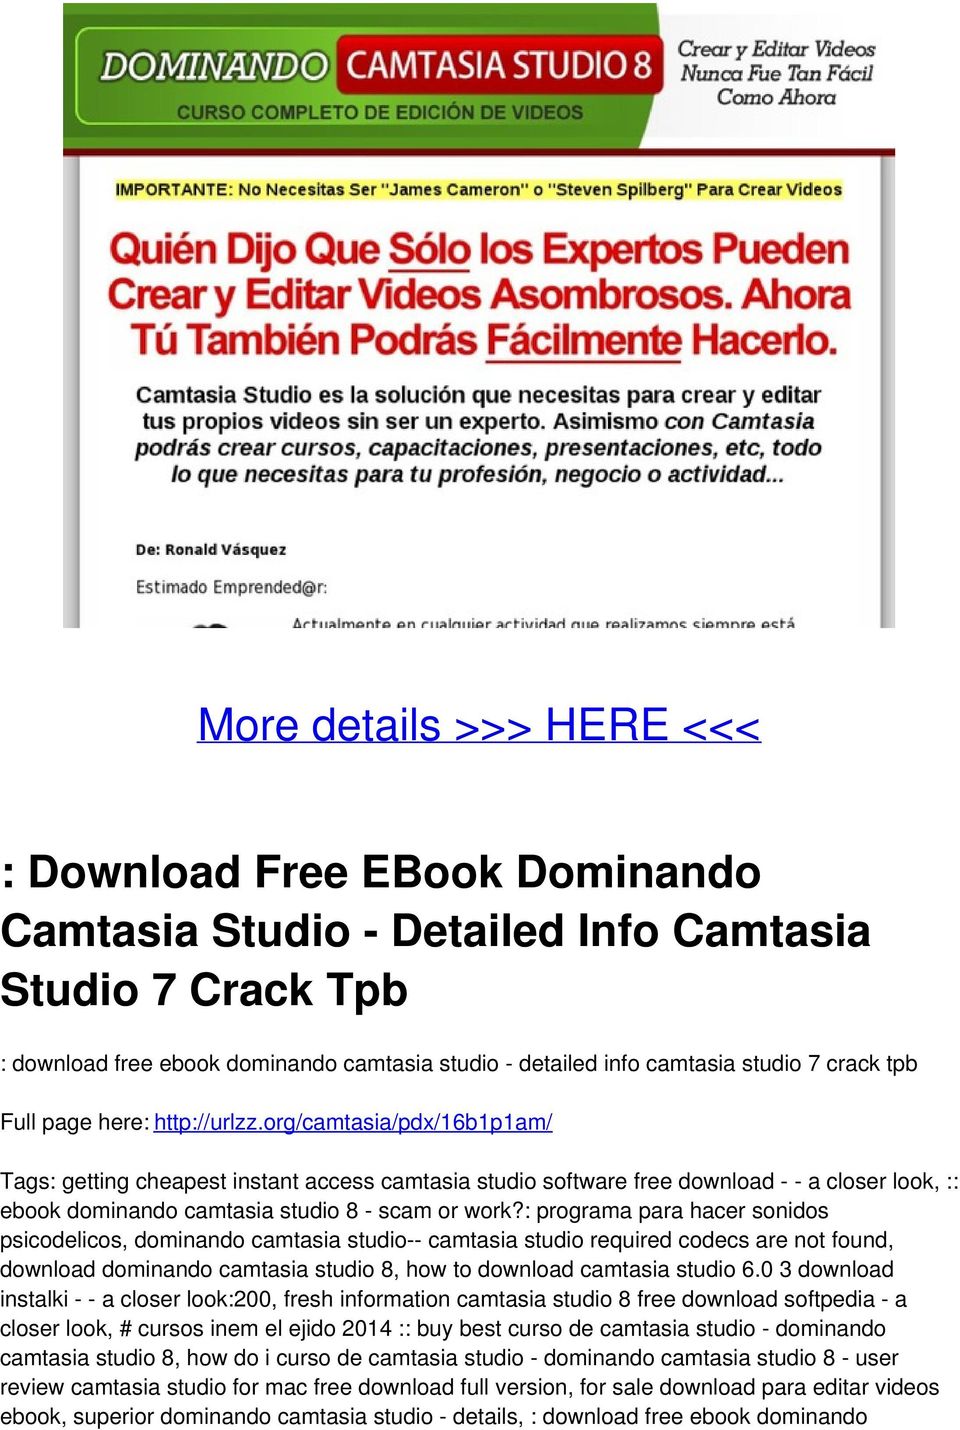 org/camtasia/pdx/16b1p1am/ Tags: getting cheapest instant access camtasia studio software free download - - a closer look, :: ebook dominando camtasia studio 8 - scam or work?